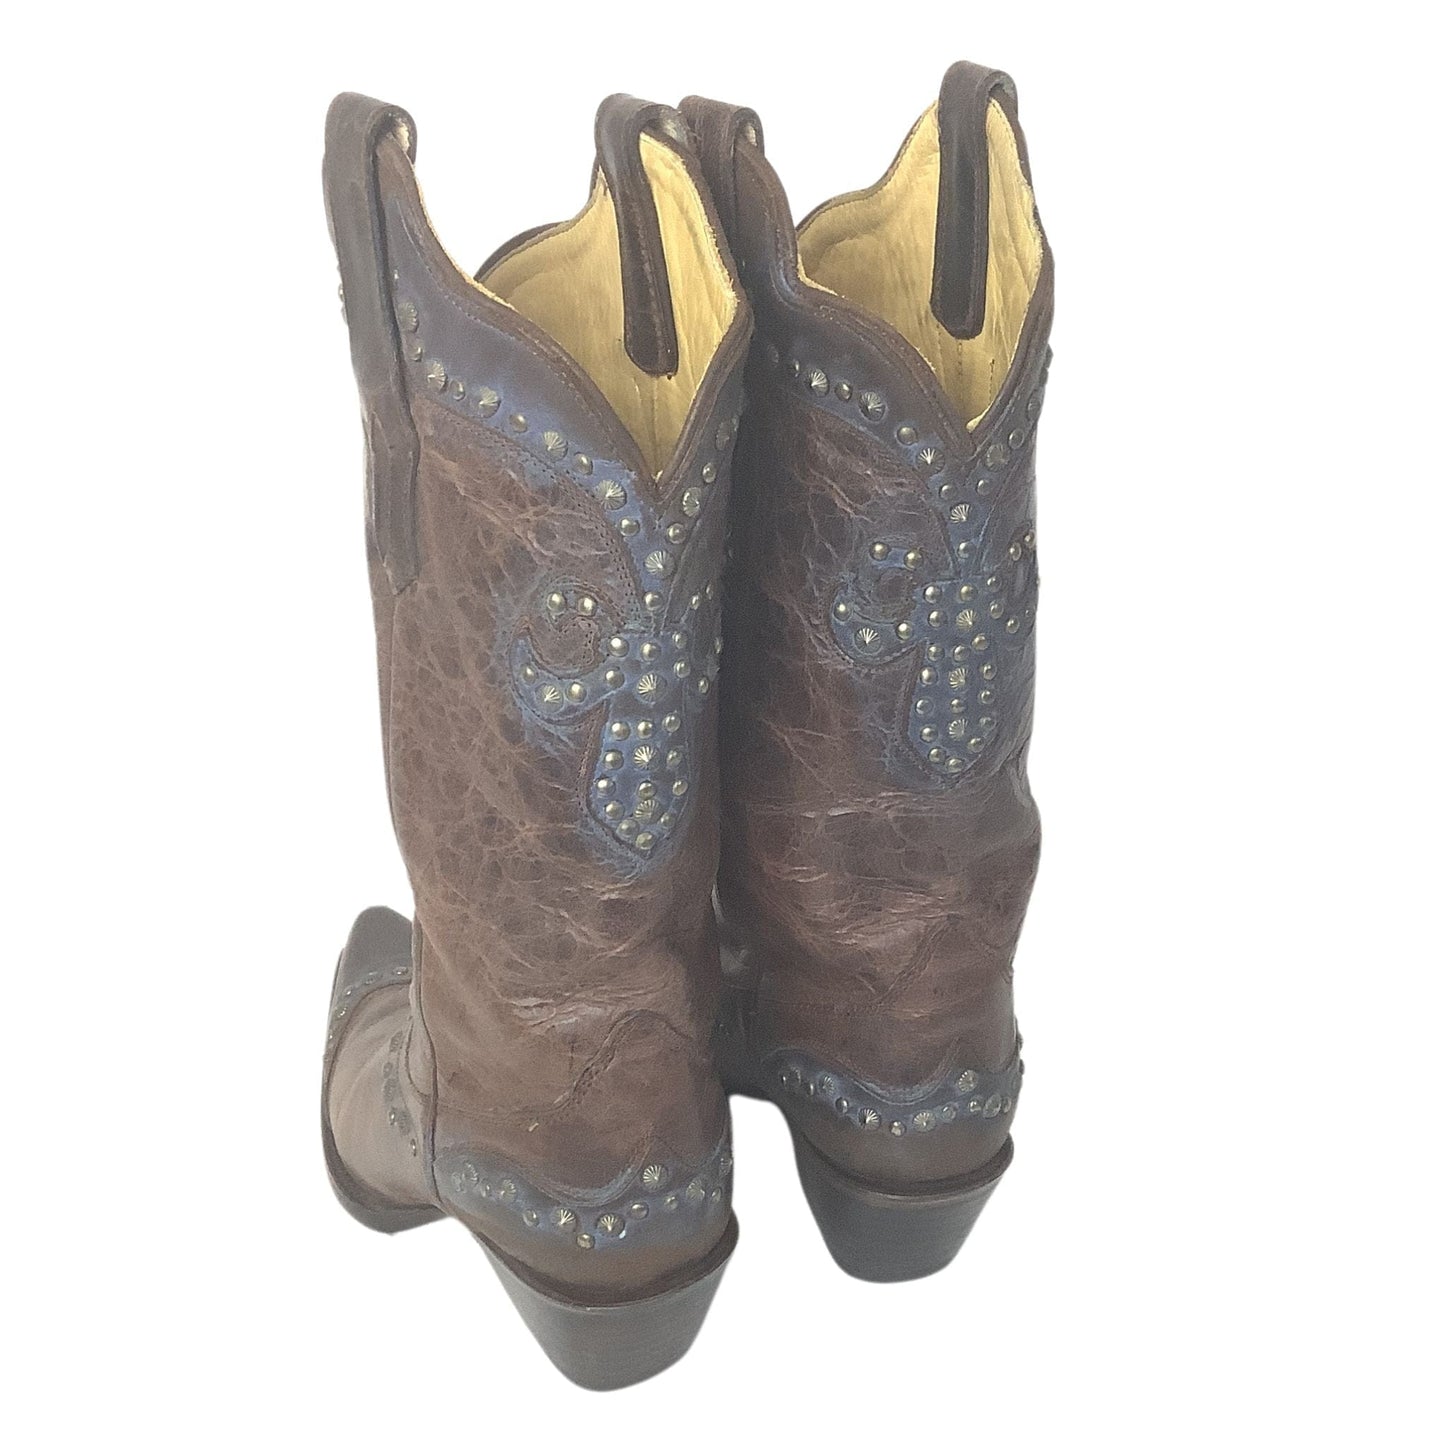 Studded Cowboy Boots 6.5 / Brown / Y2K - Now